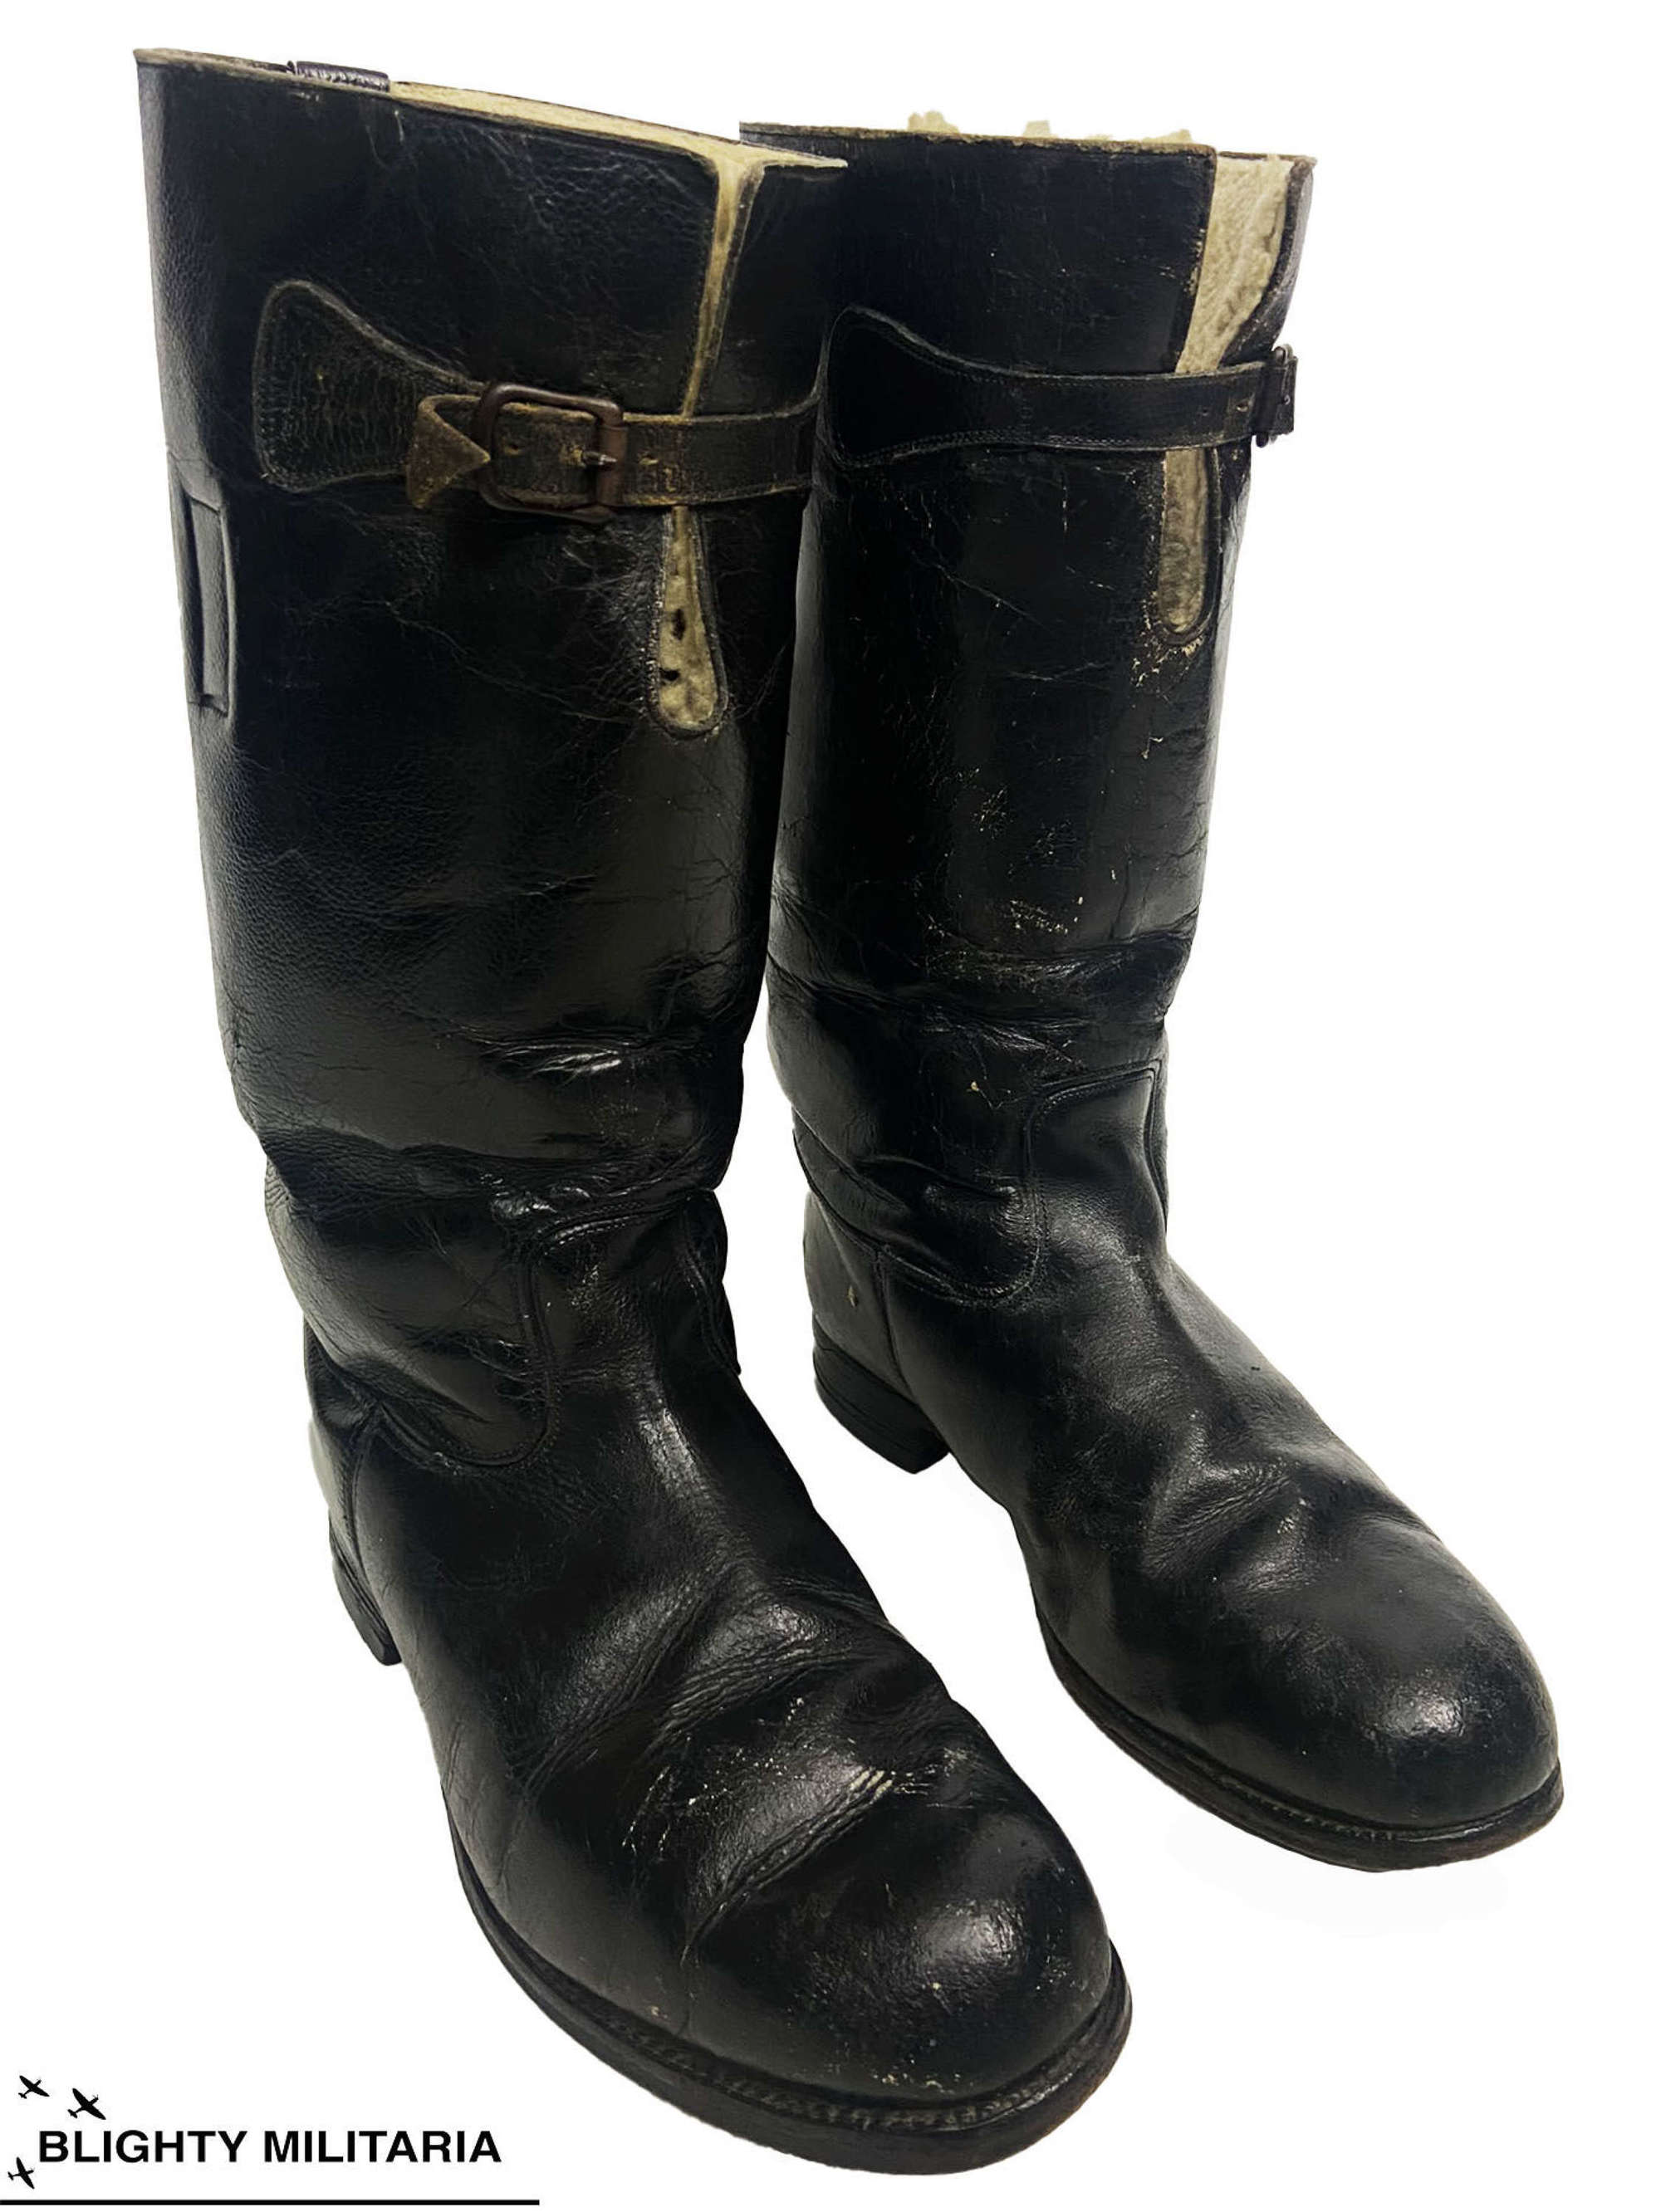 Original RAF Private Purchase 1936 Pattern Flying Boots - Size 7